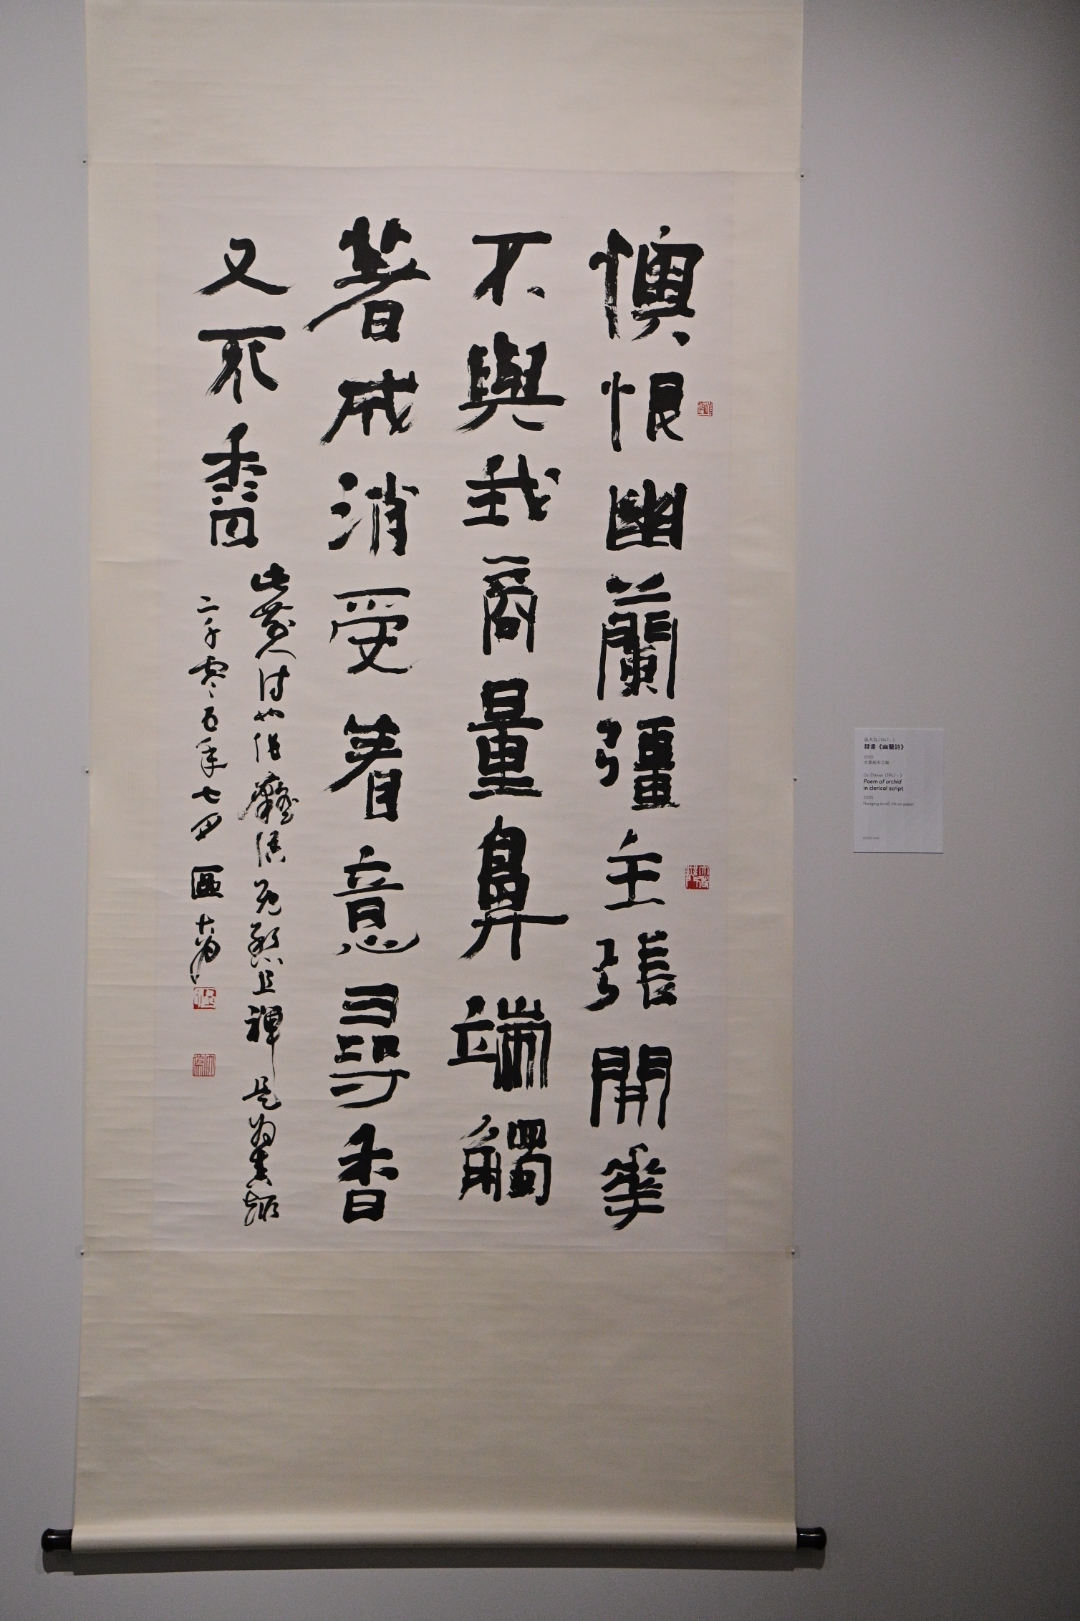 The "City Rhymes: The Melodious Notes of Calligraphy" exhibition will be held from tomorrow (July 22) at the Hong Kong Museum of Art. Photo shows Ou Dawei's "Poem of orchid in clerical script".